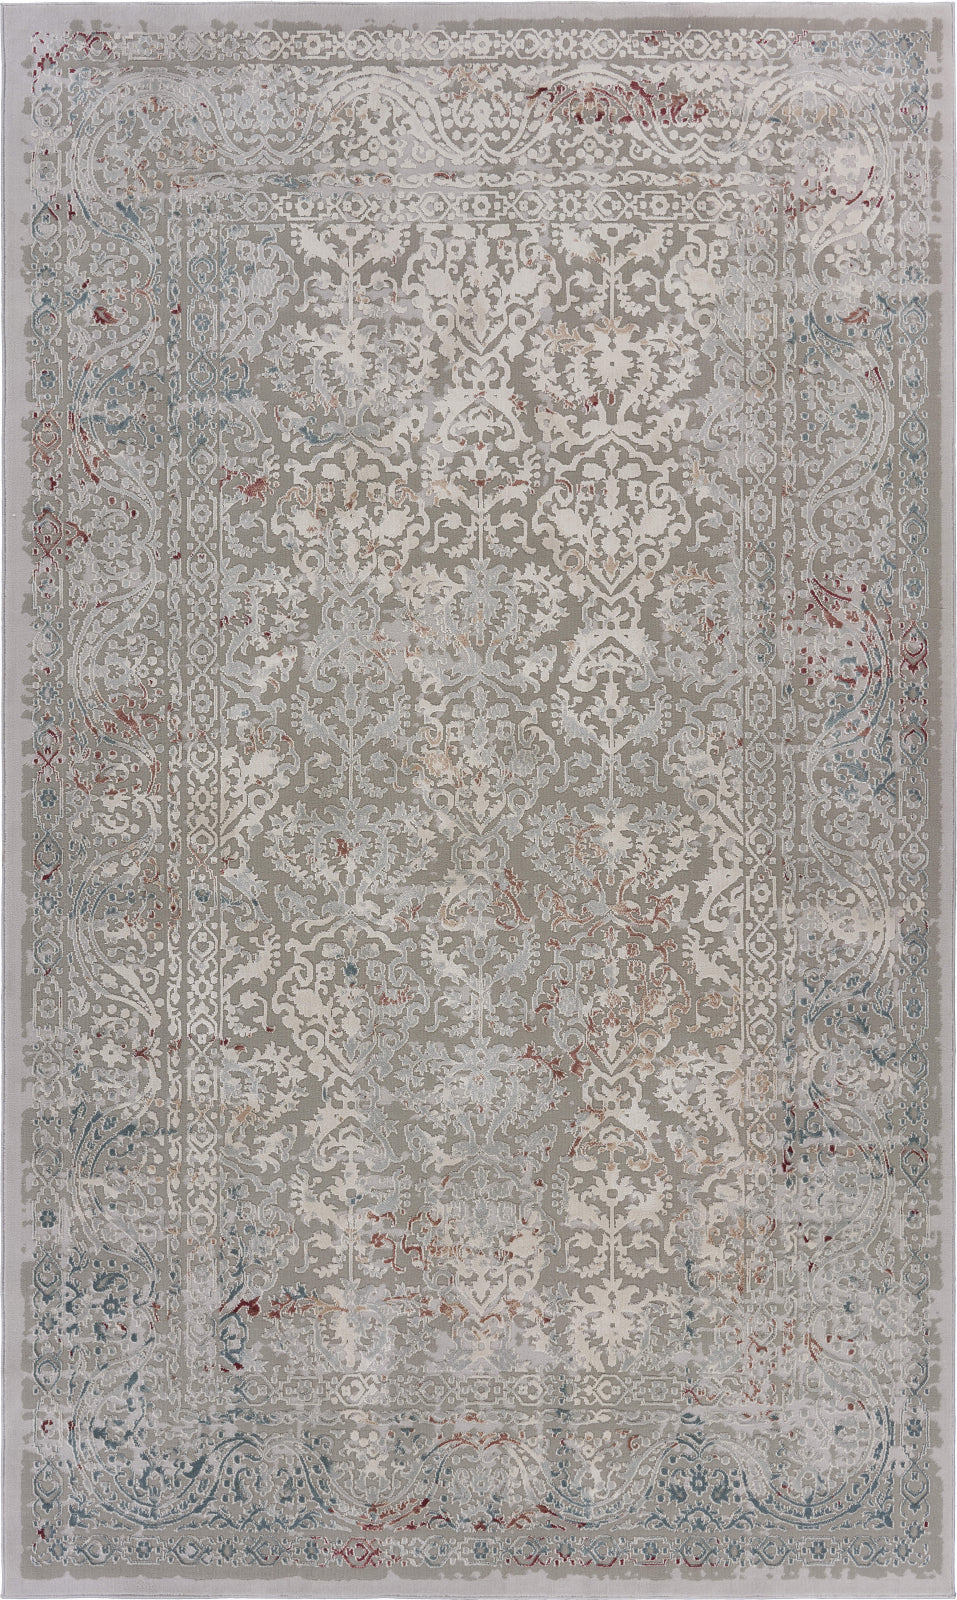 LR Resources Imagine Clouded Contemporary Gray / Wine Area Rug 5' 3'' X 7' 6'' Main Image